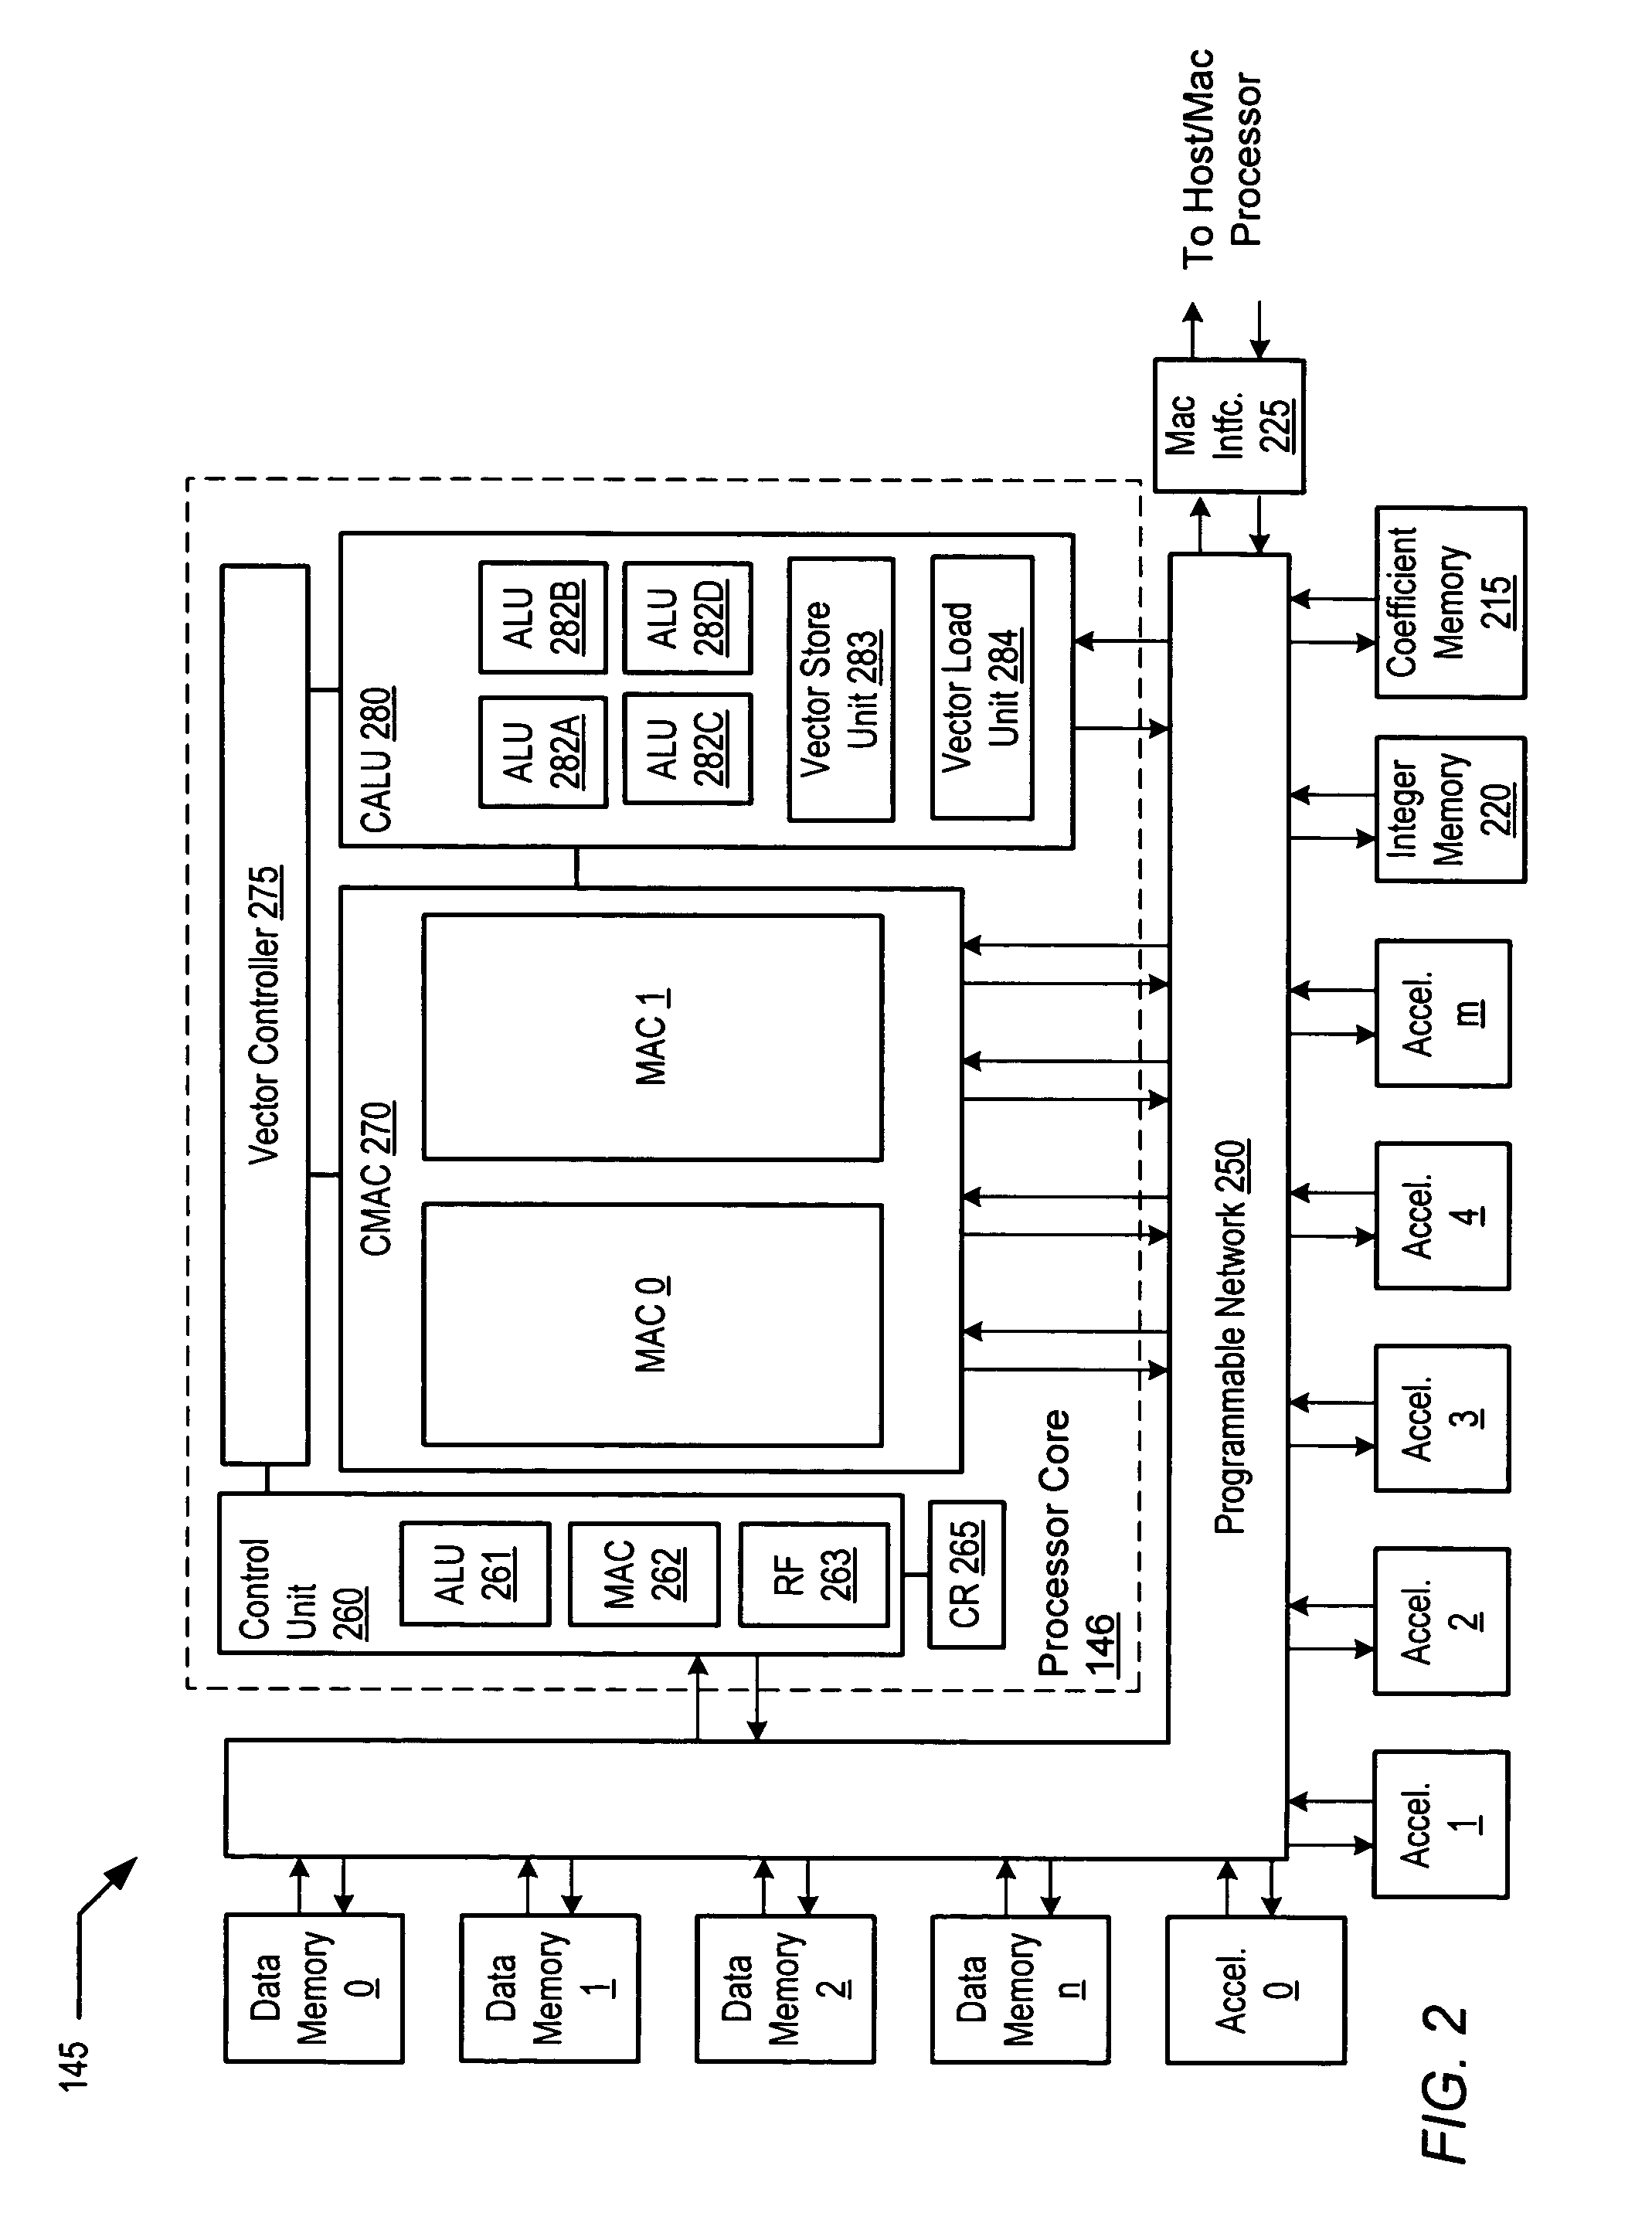 Data processing without processor core intervention by chain of accelerators selectively coupled by programmable interconnect network and to memory